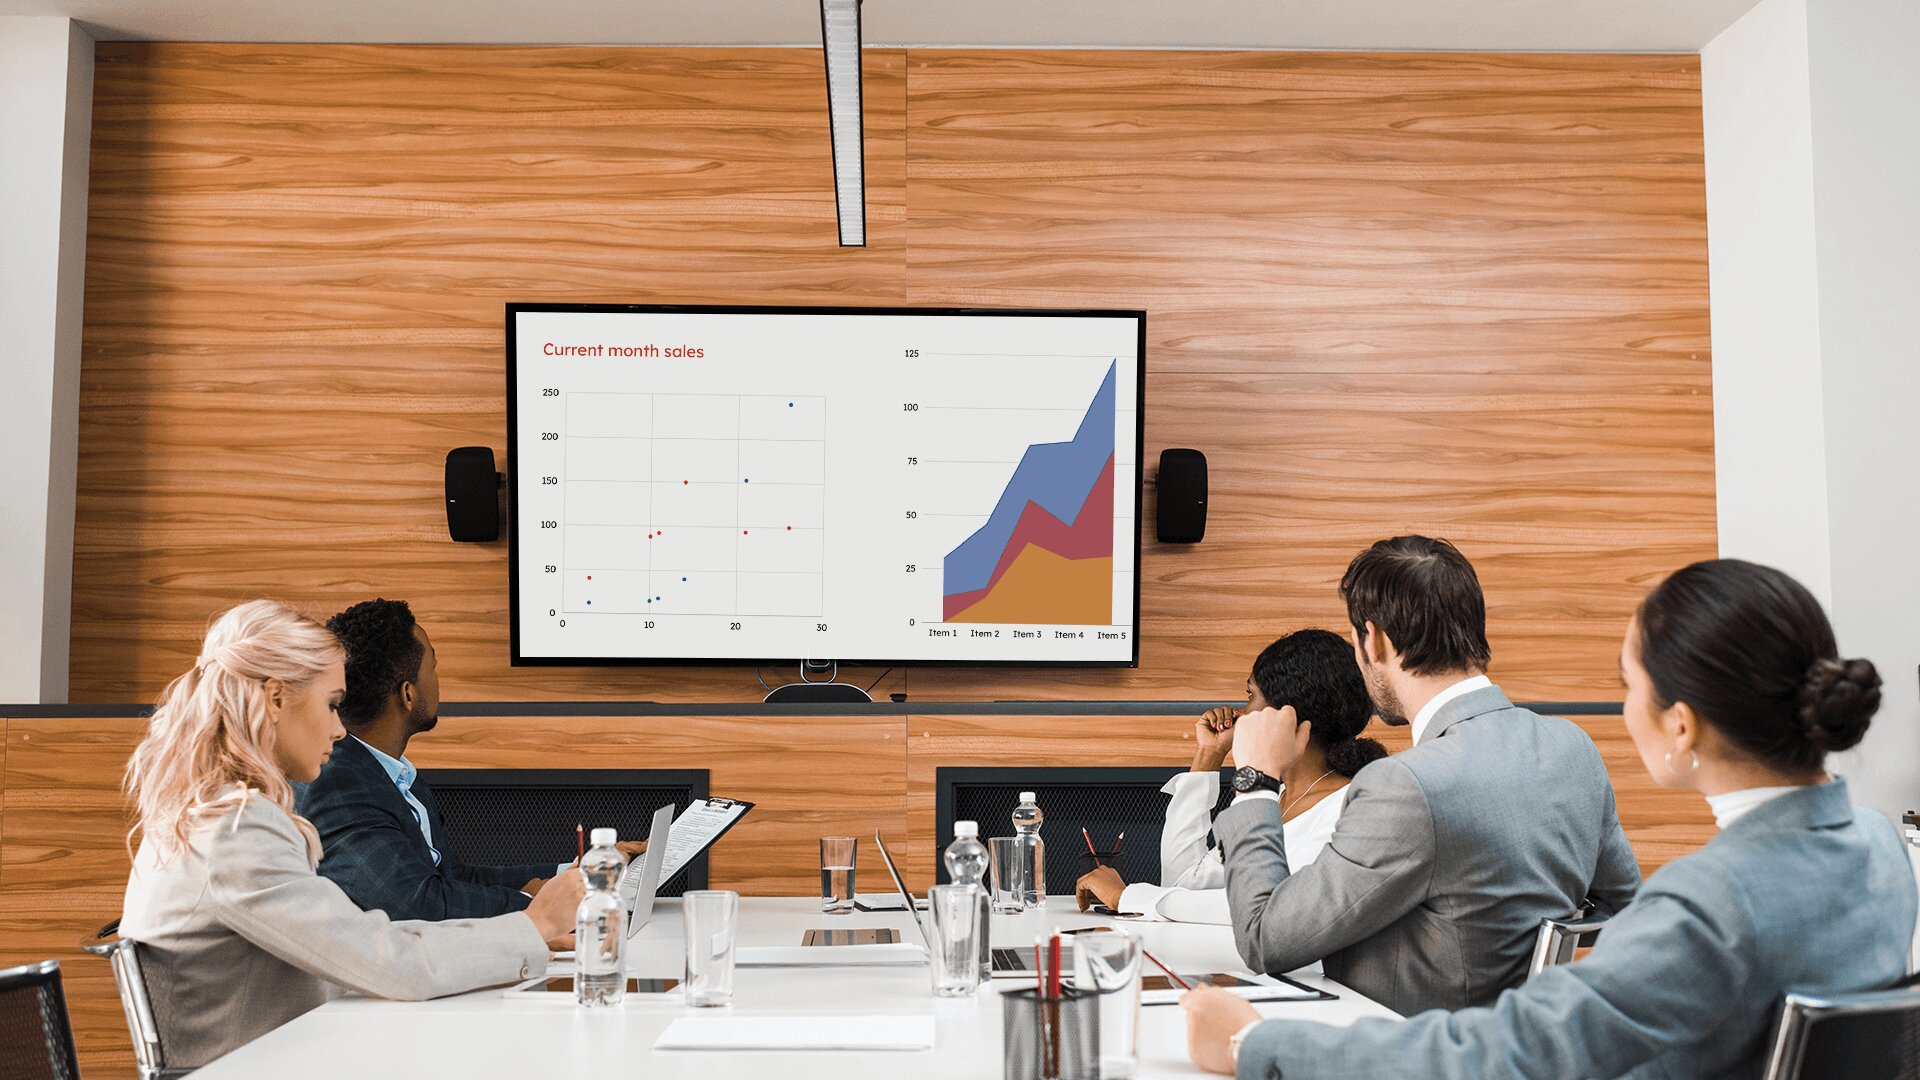 Employees sitting in a meeting room discuss the monthly sales stats that are being presented on a large digital signage screen